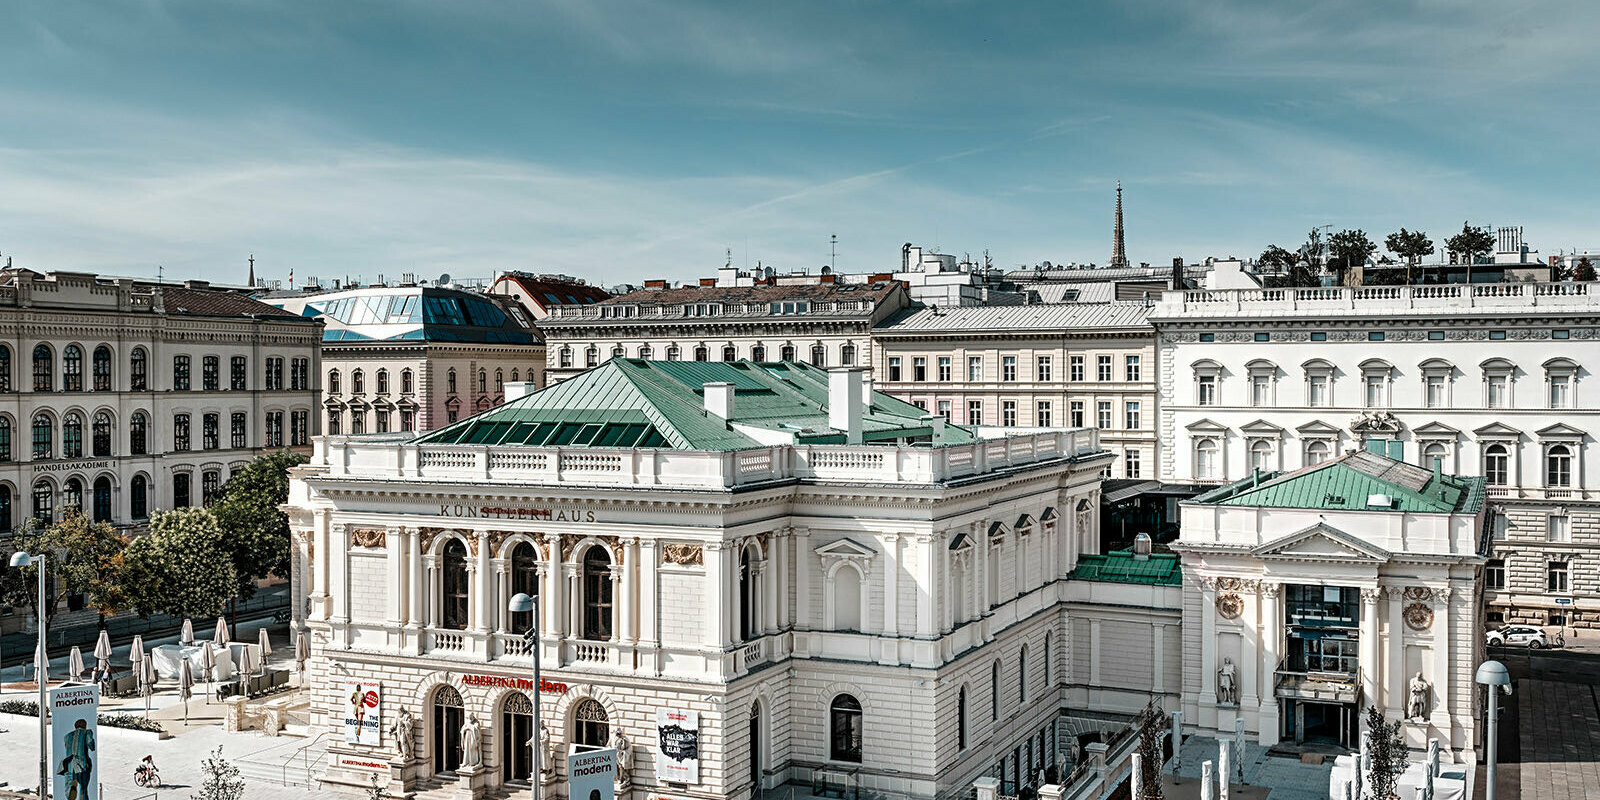 You can see the Künstlerhaus in Vienna, surrounded by other buildings.